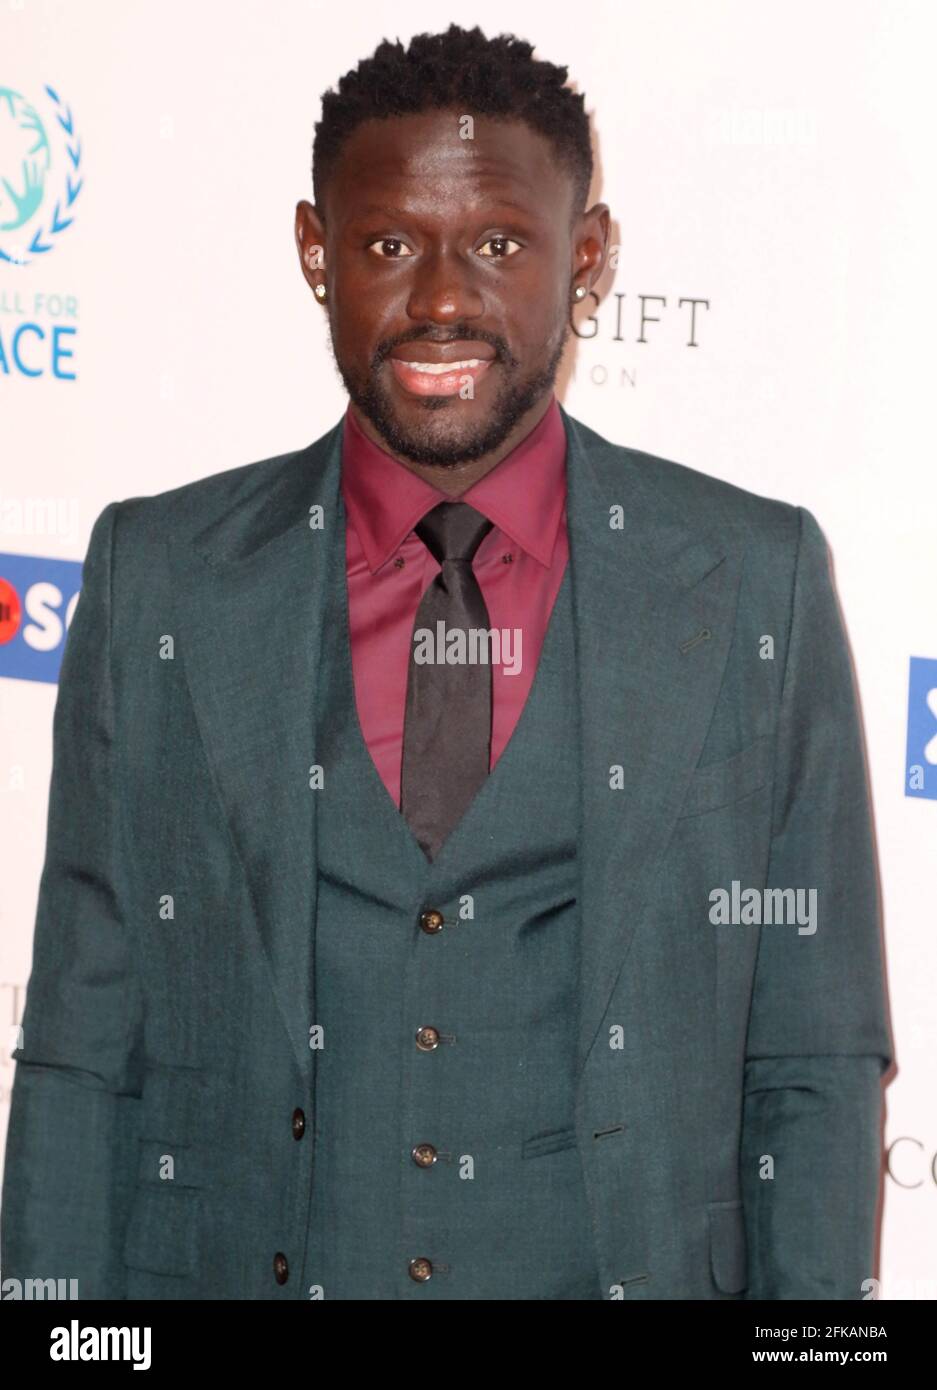 Apr 08, 2019 - London, England, UK - Football For Peace Initiative Dinner by Global Gift     Photo Shows: Adrissa Gana Gueye Stock Photo